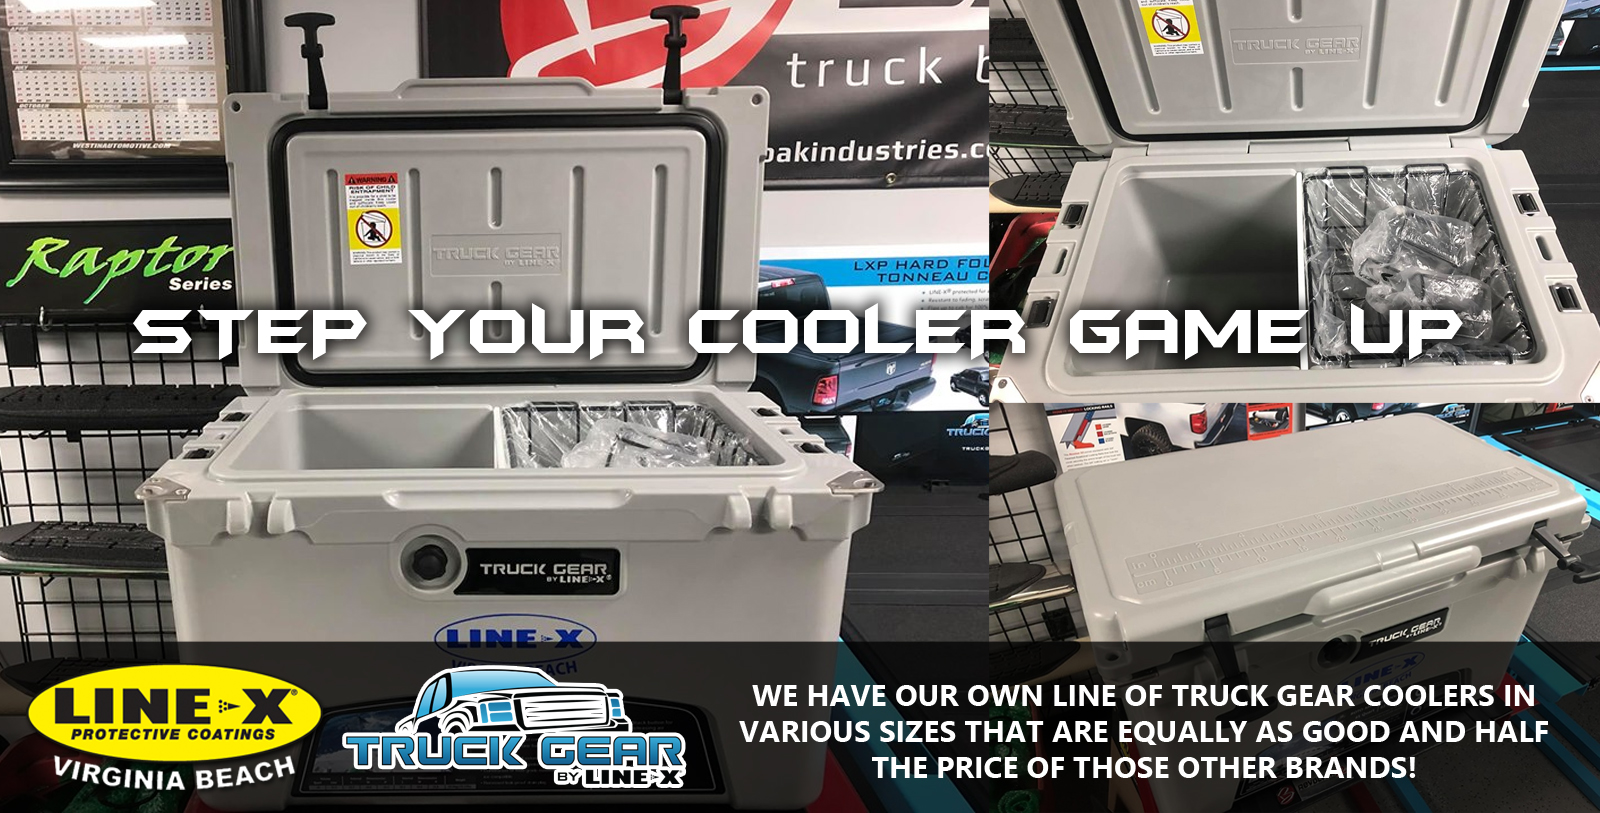 Summer is Upon Us and It's Time to Step Your Cooler Game Up!